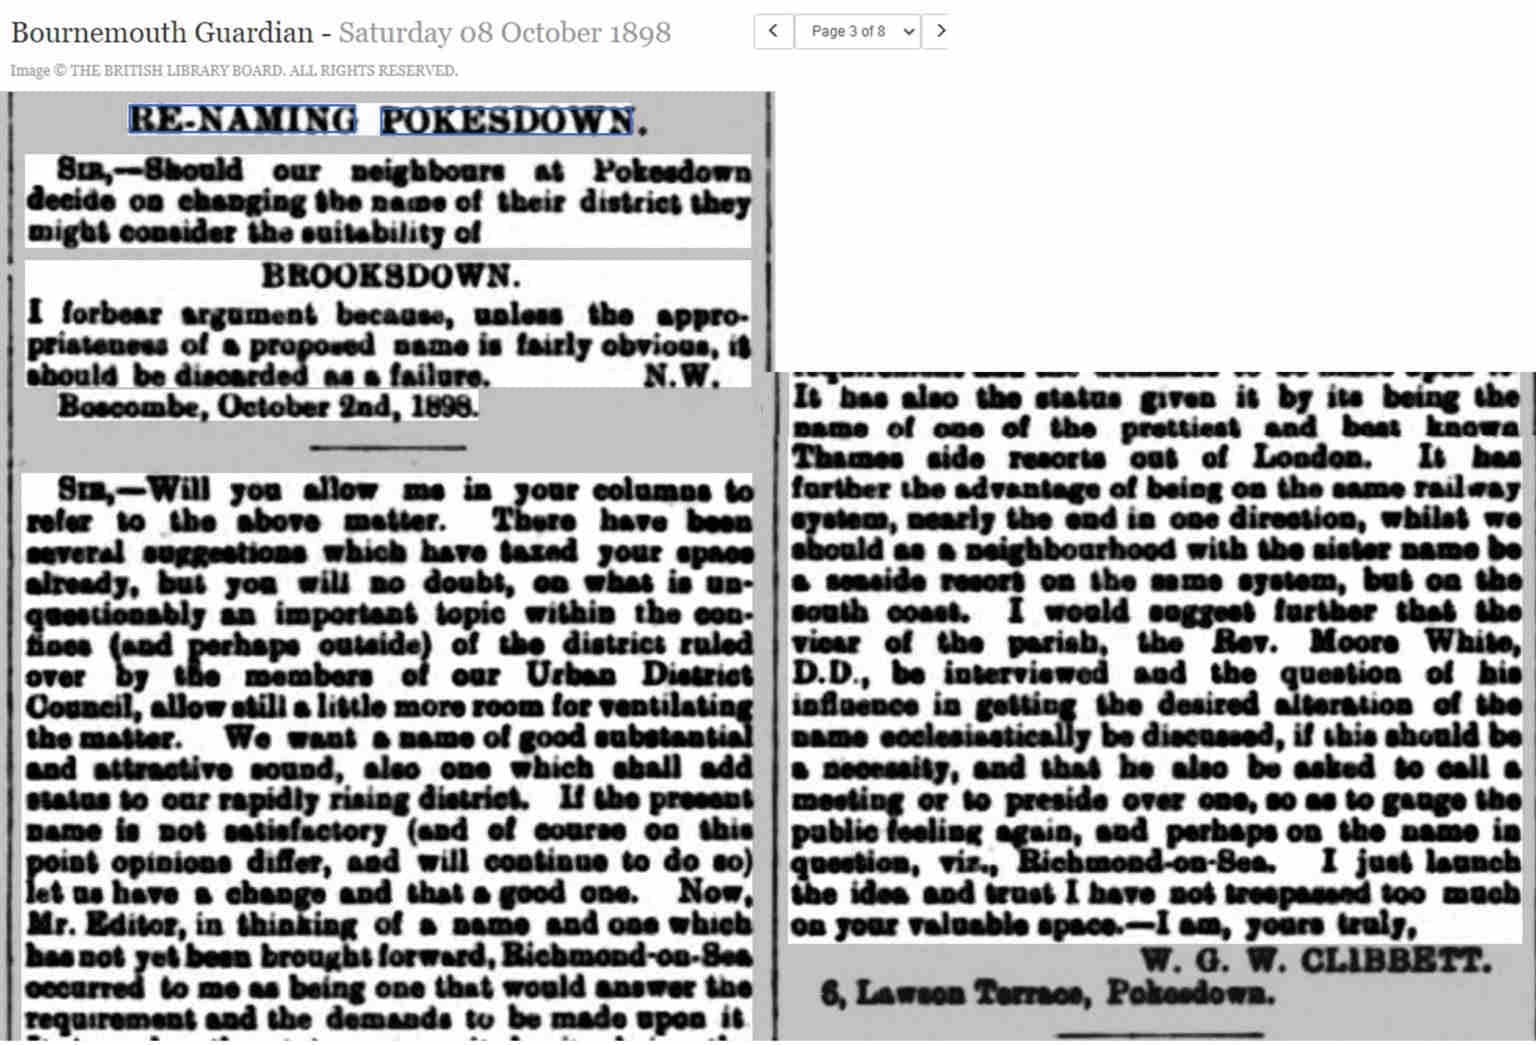 letters to Bournemouth Guardian newspaper 1898 suggesting name of Pokesdown by changed to Brooksdown or Richmond-on-Sea